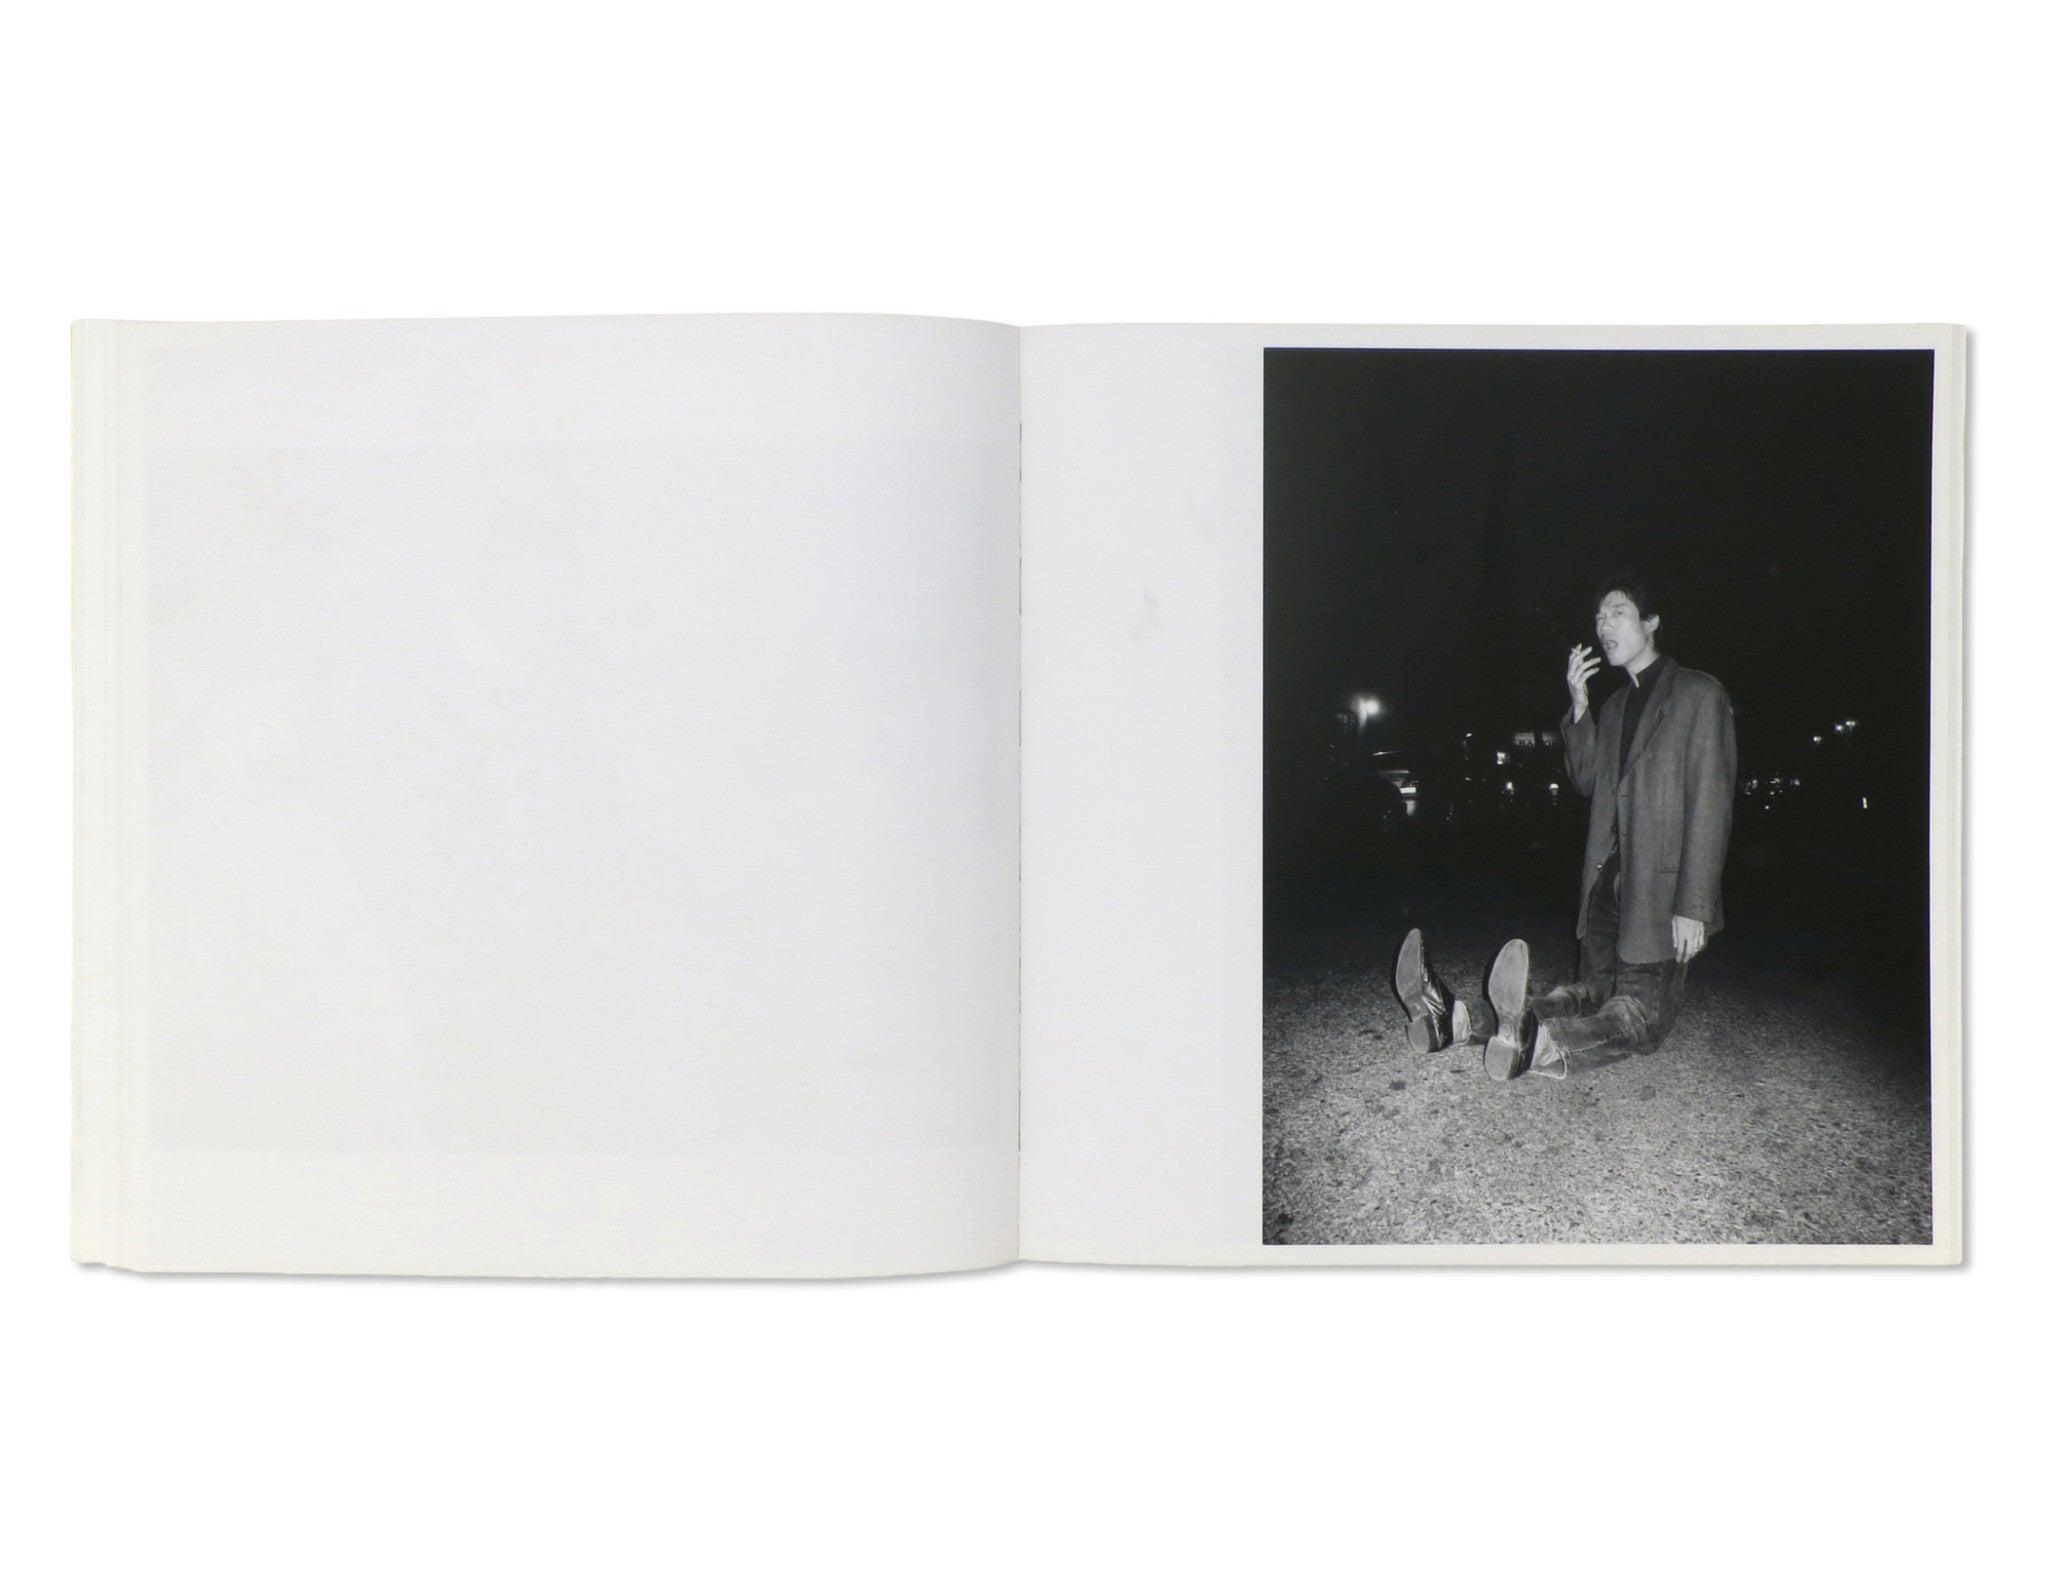 WRONG by Asger Carlsen [SIGNED]